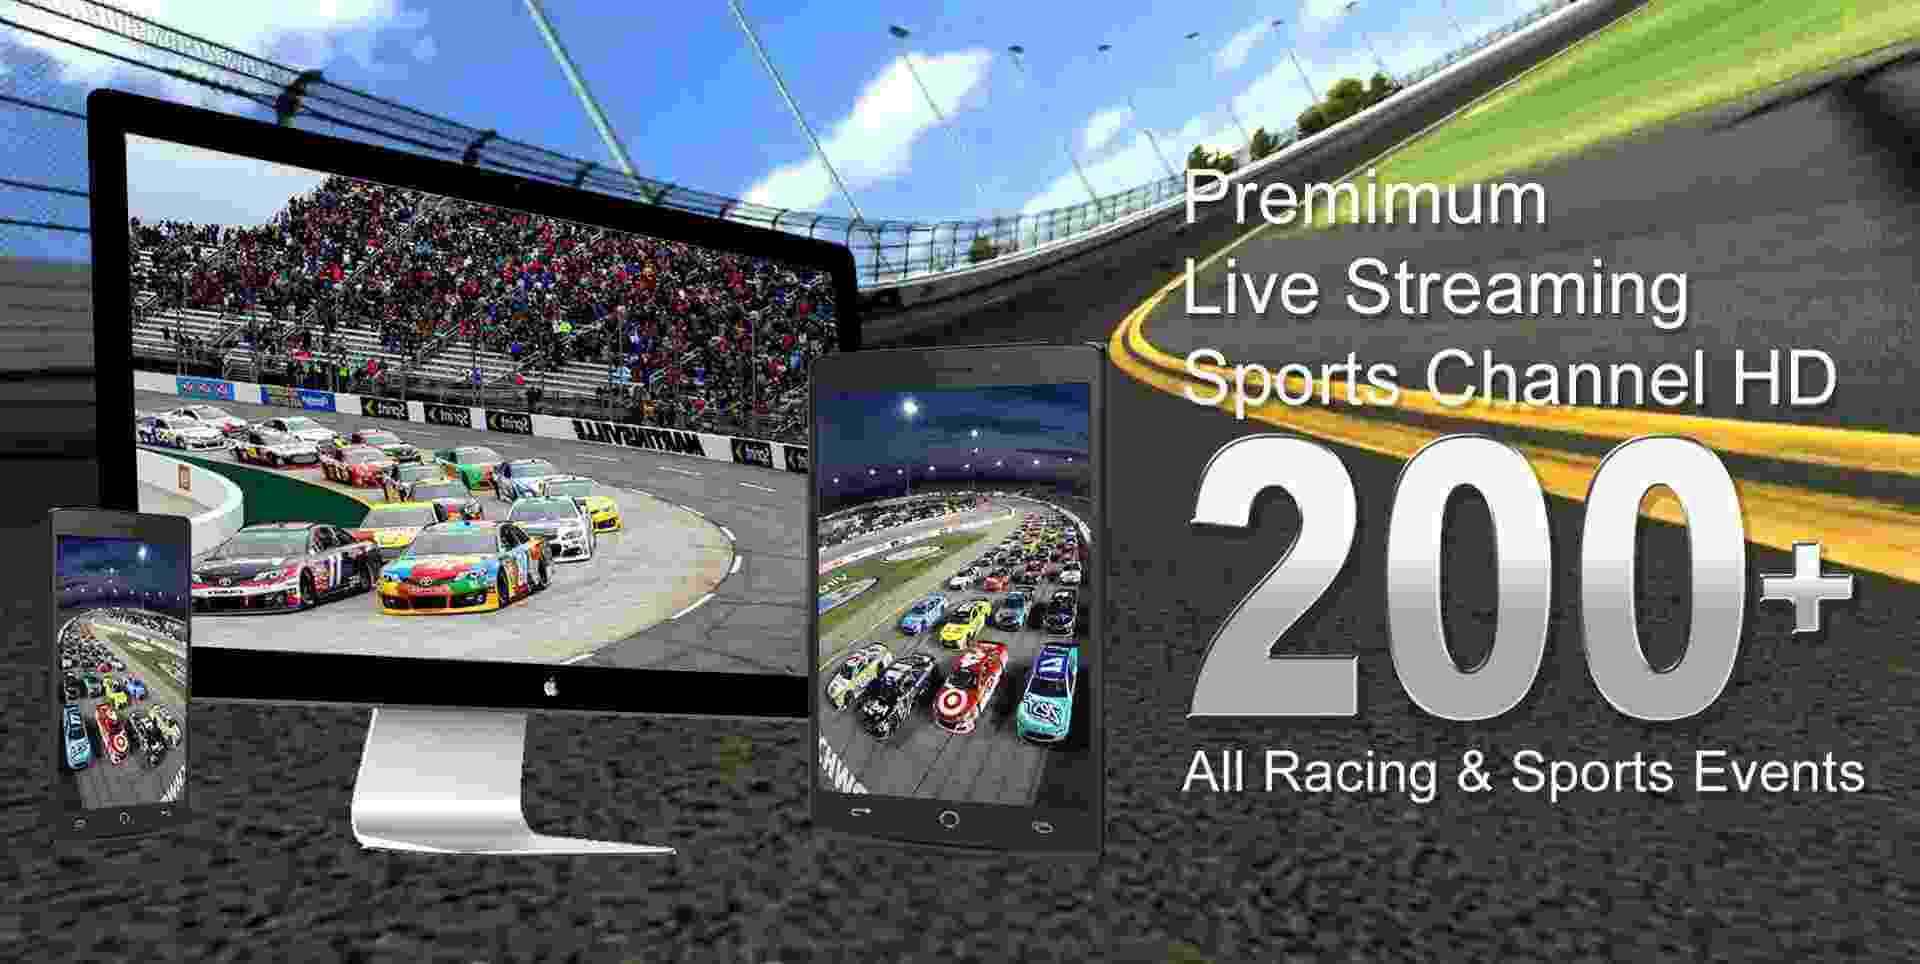 Where to Watch Bank of America 500 Live